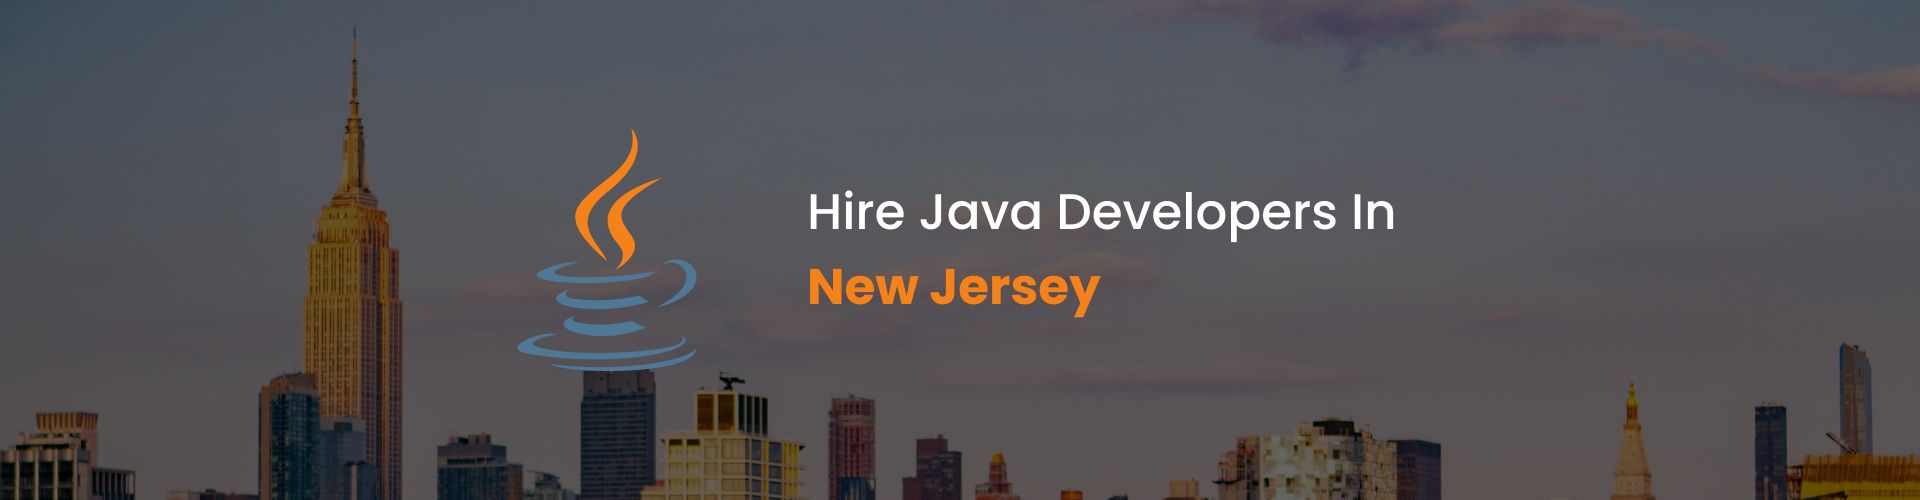 hire java developers in new jersey